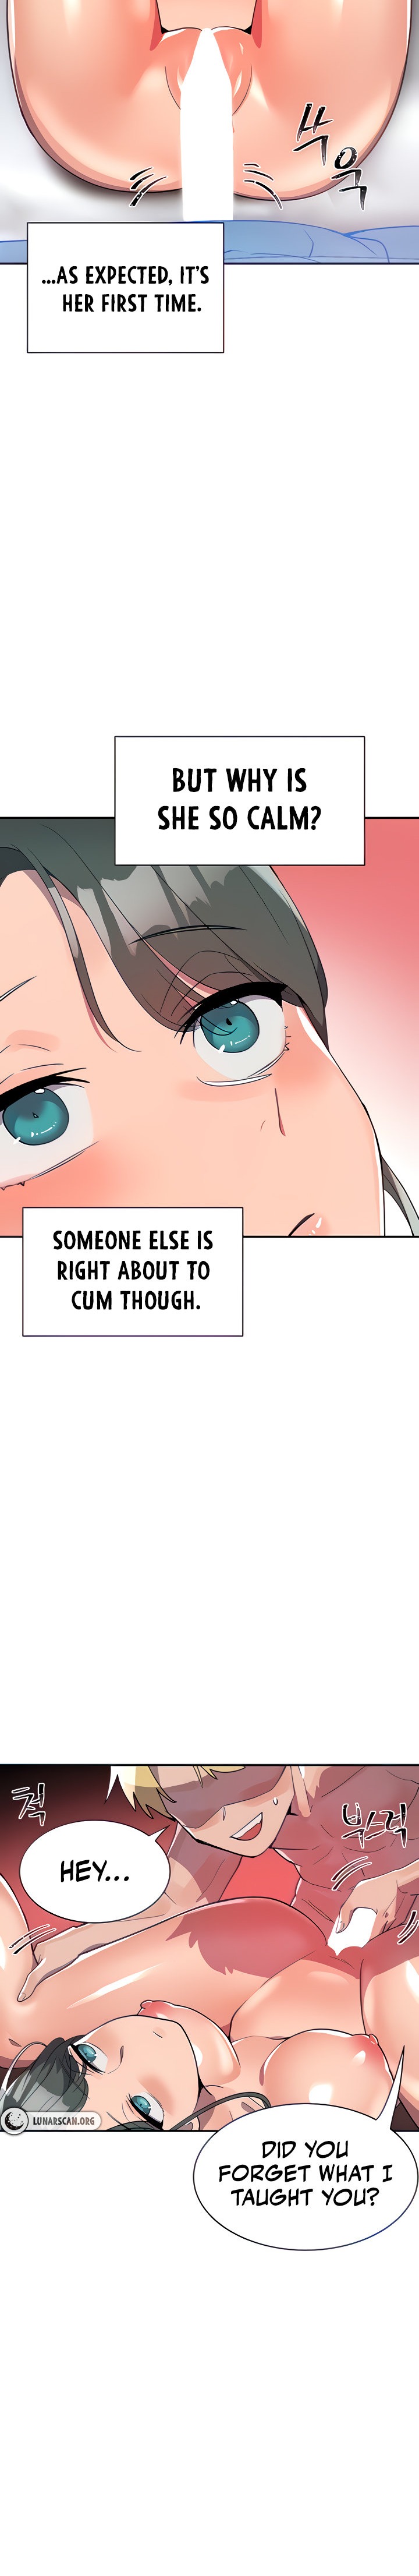 Relationship Reverse Button: Let’s Educate That Arrogant Girl - Chapter 6 Page 3